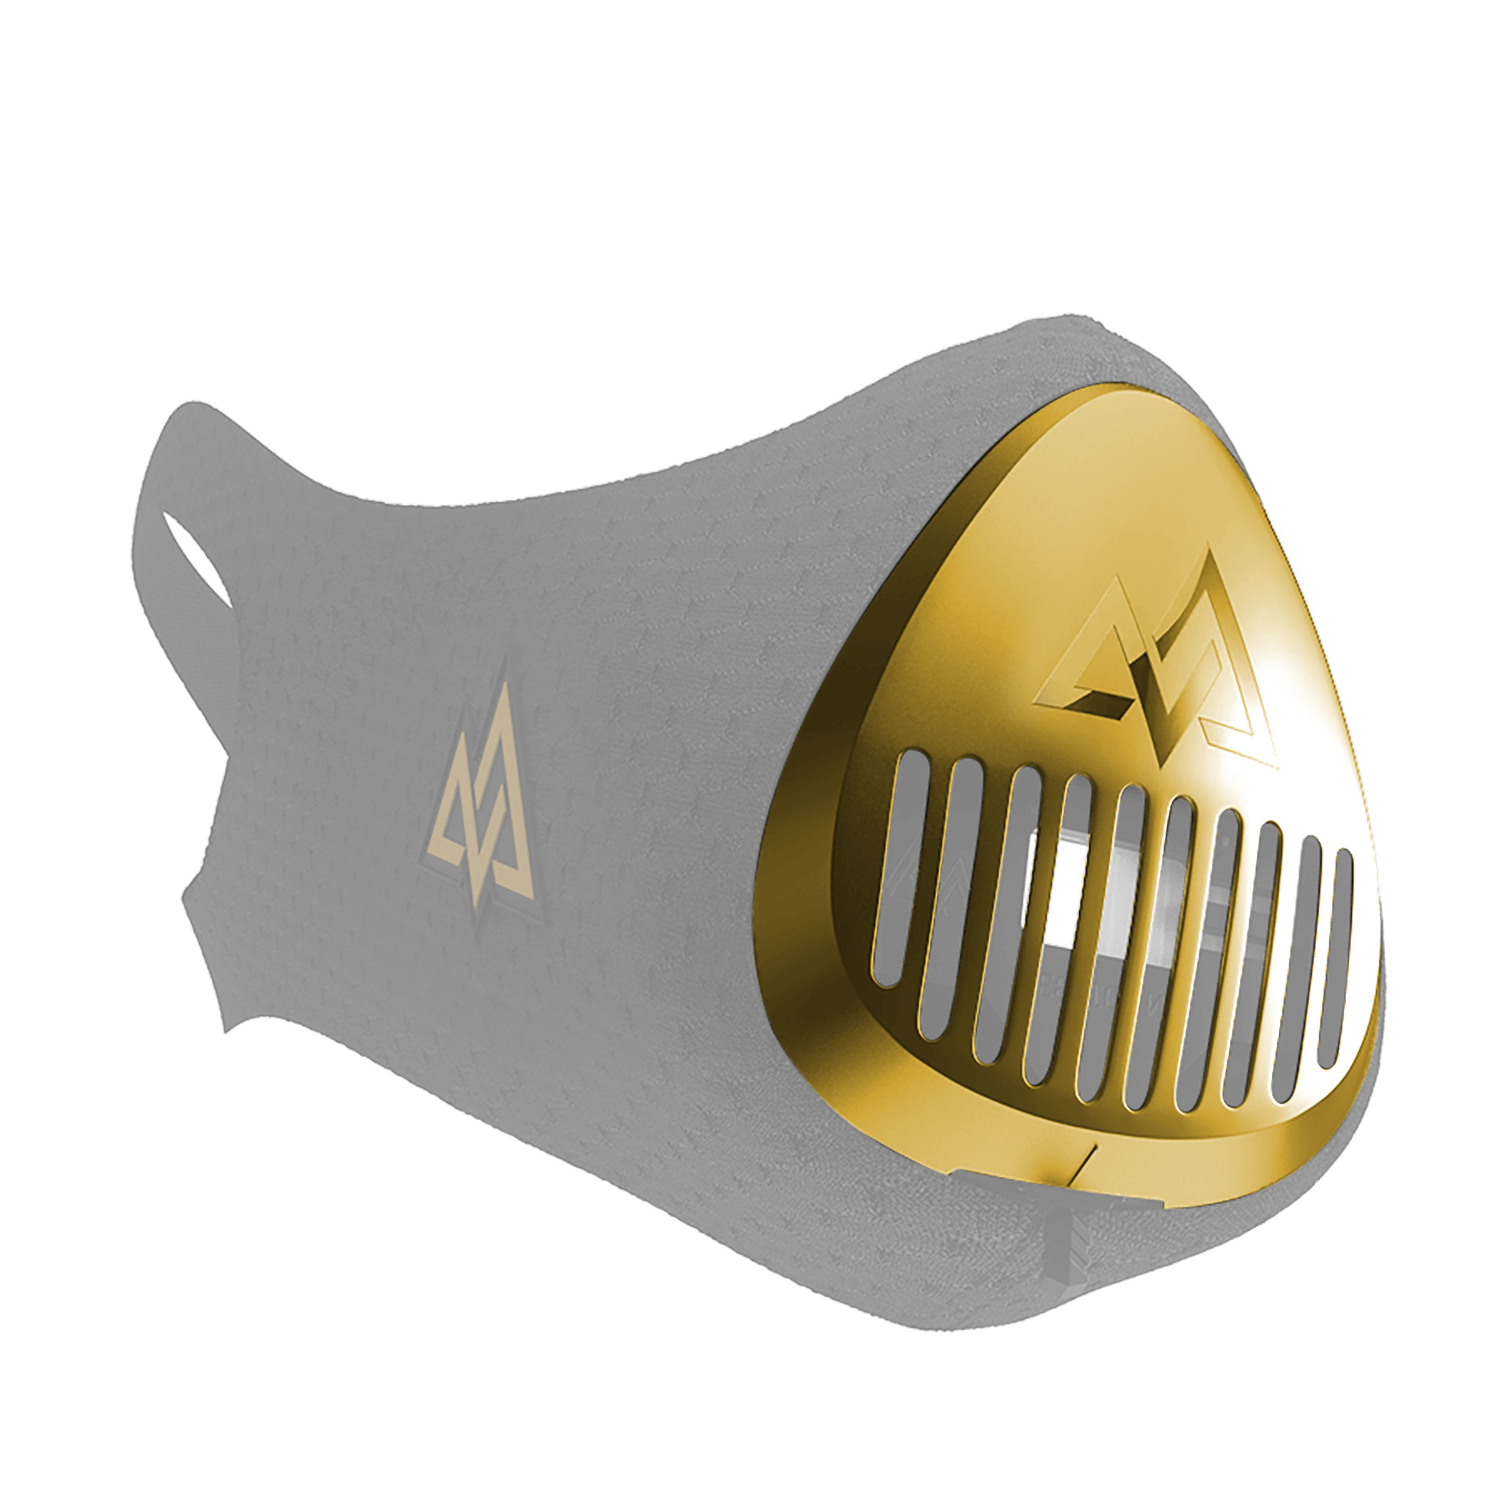 3.0 Gold Chrome Cap - Right side view on mask